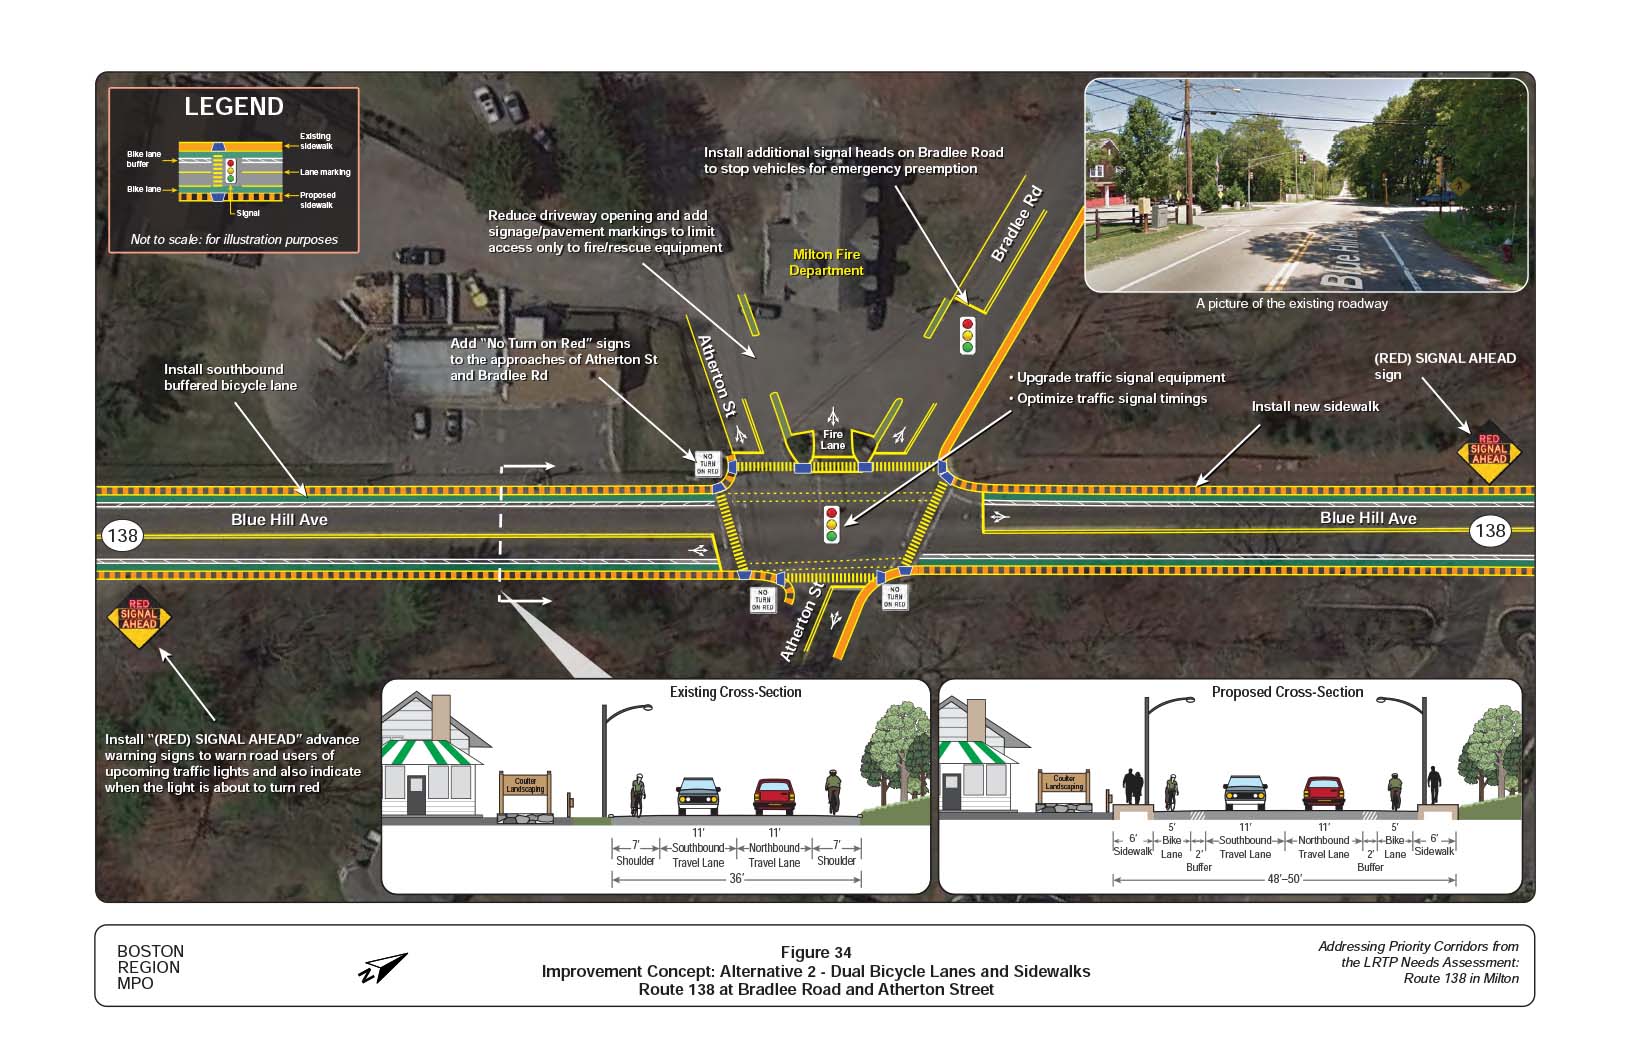 Figure 34 is an aerial photo of Route 138 at Bradlee Road and Atherton Street showing Alternative 2, dual bicycle lanes and sidewalks, and overlays showing the existing and proposed cross-sections.